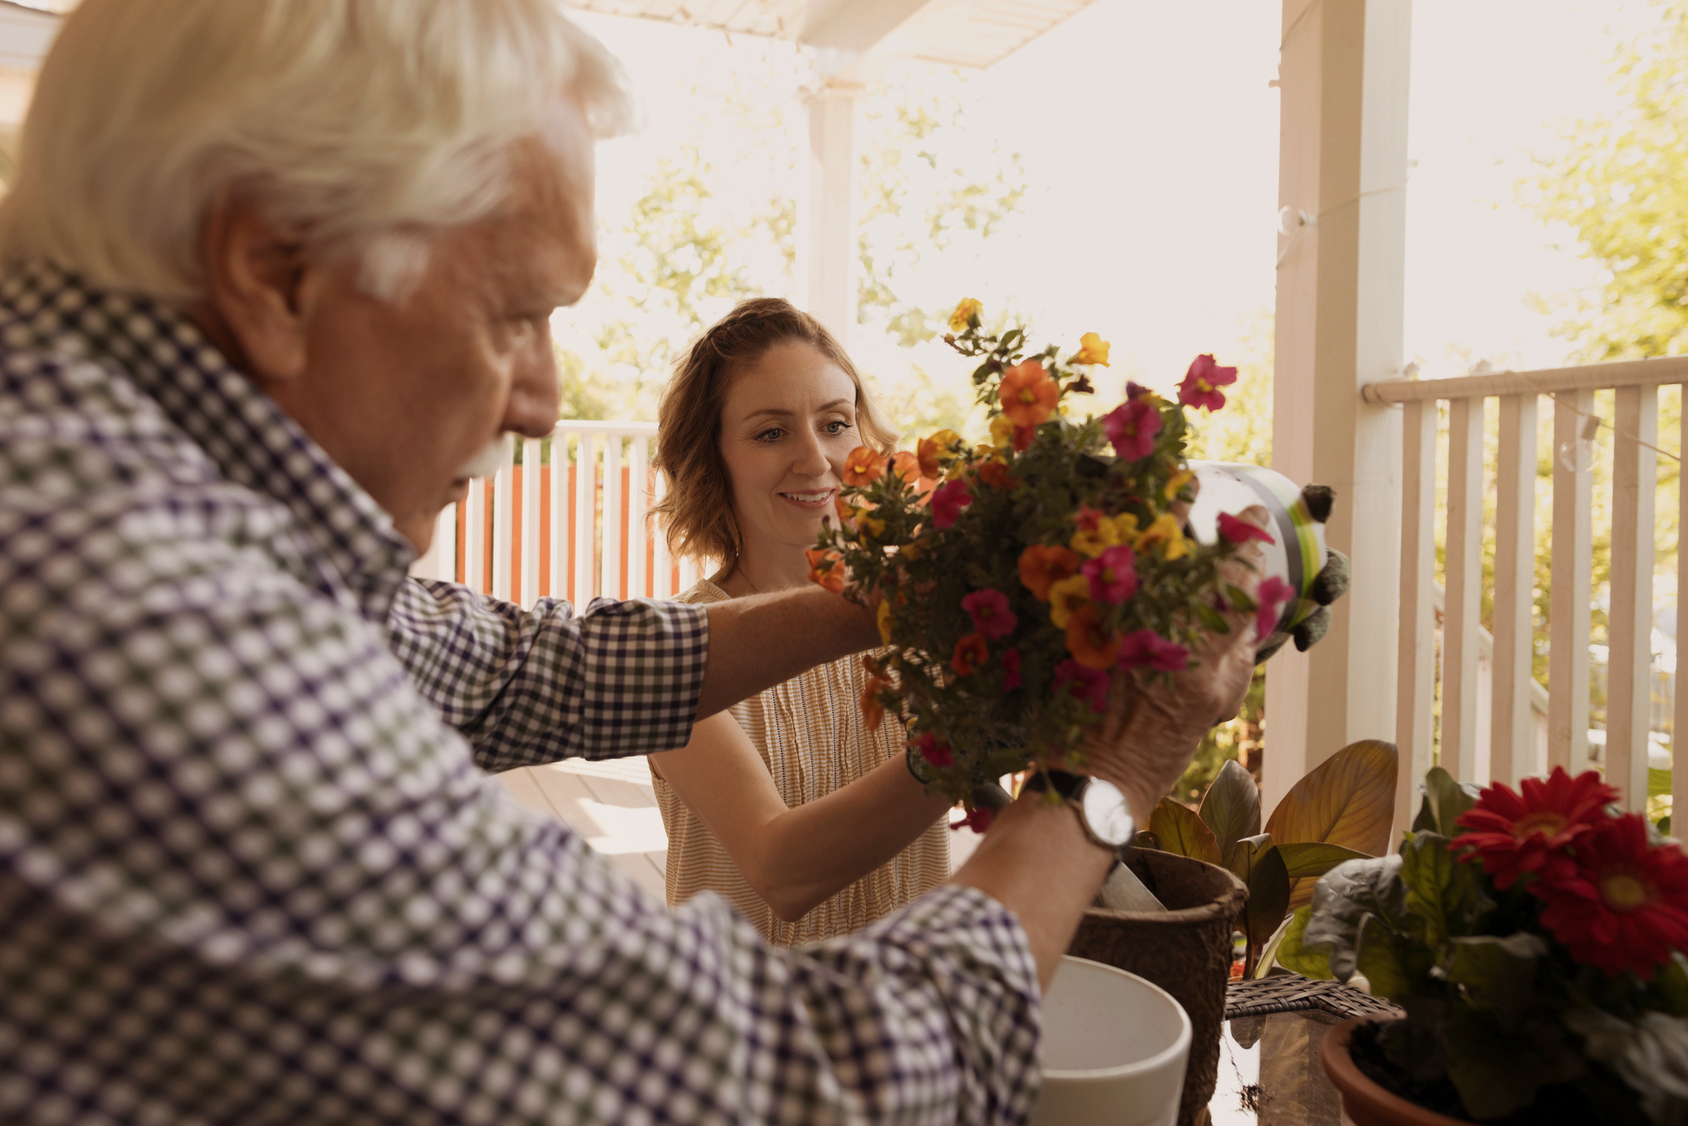 An elderly man and a young woman putting a flower bouquet into a vase.